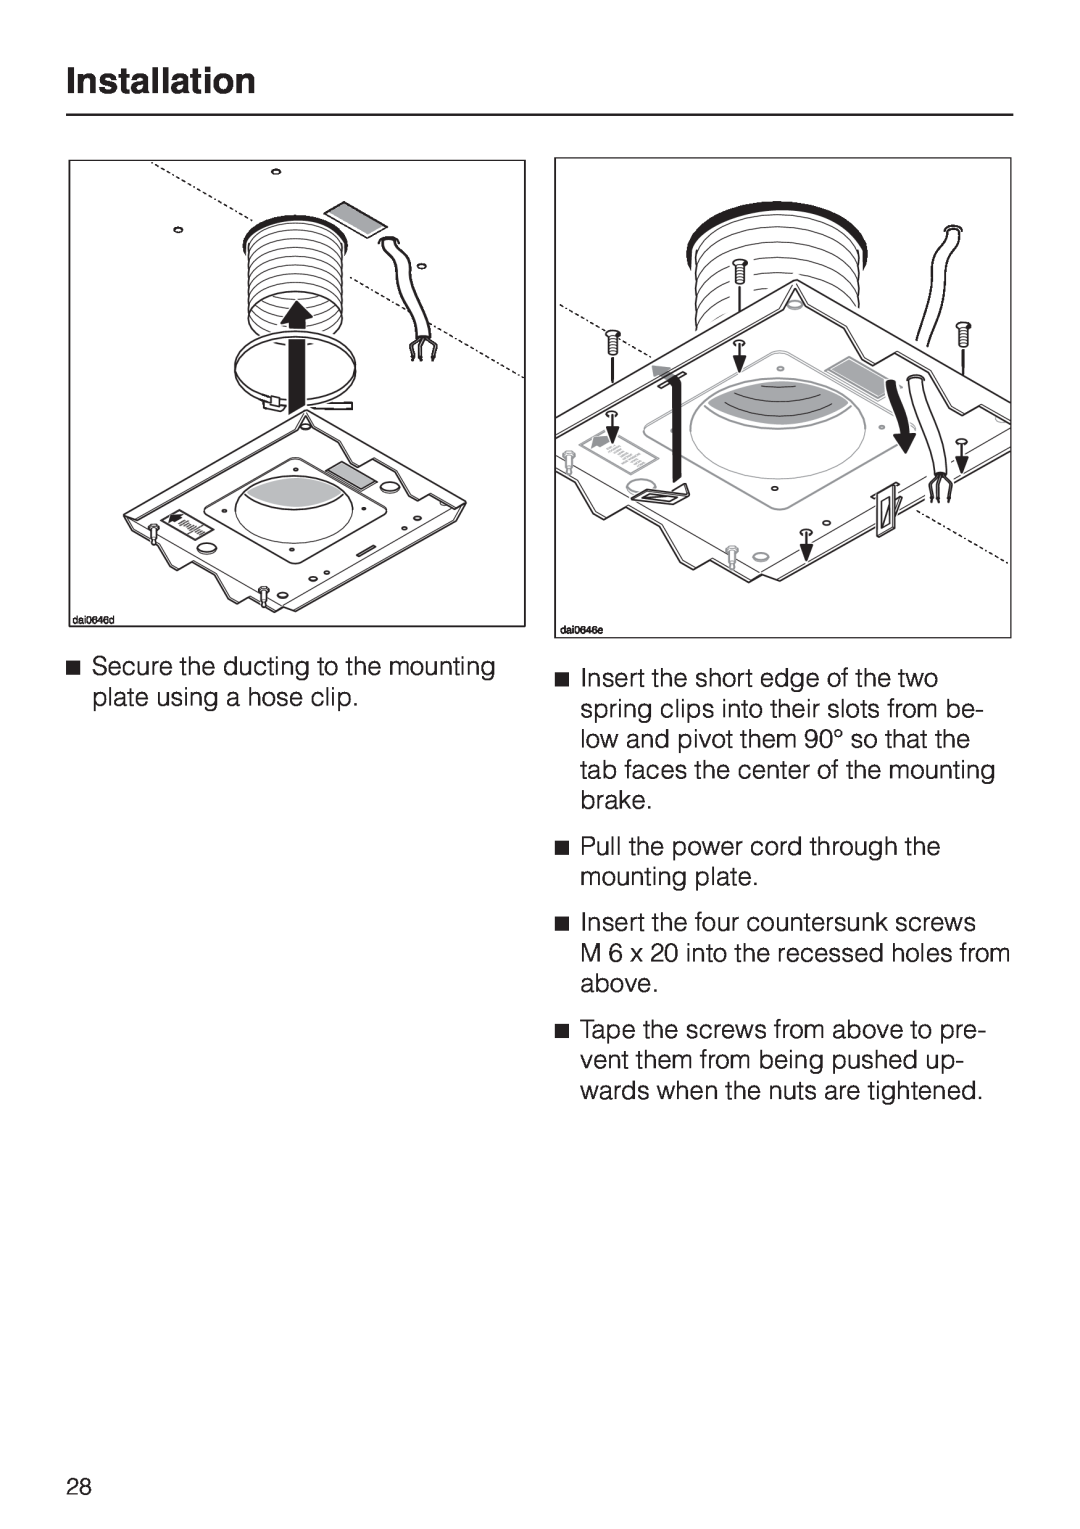 Miele DA210-3 installation instructions Installation, Pull the power cord through the mounting plate 